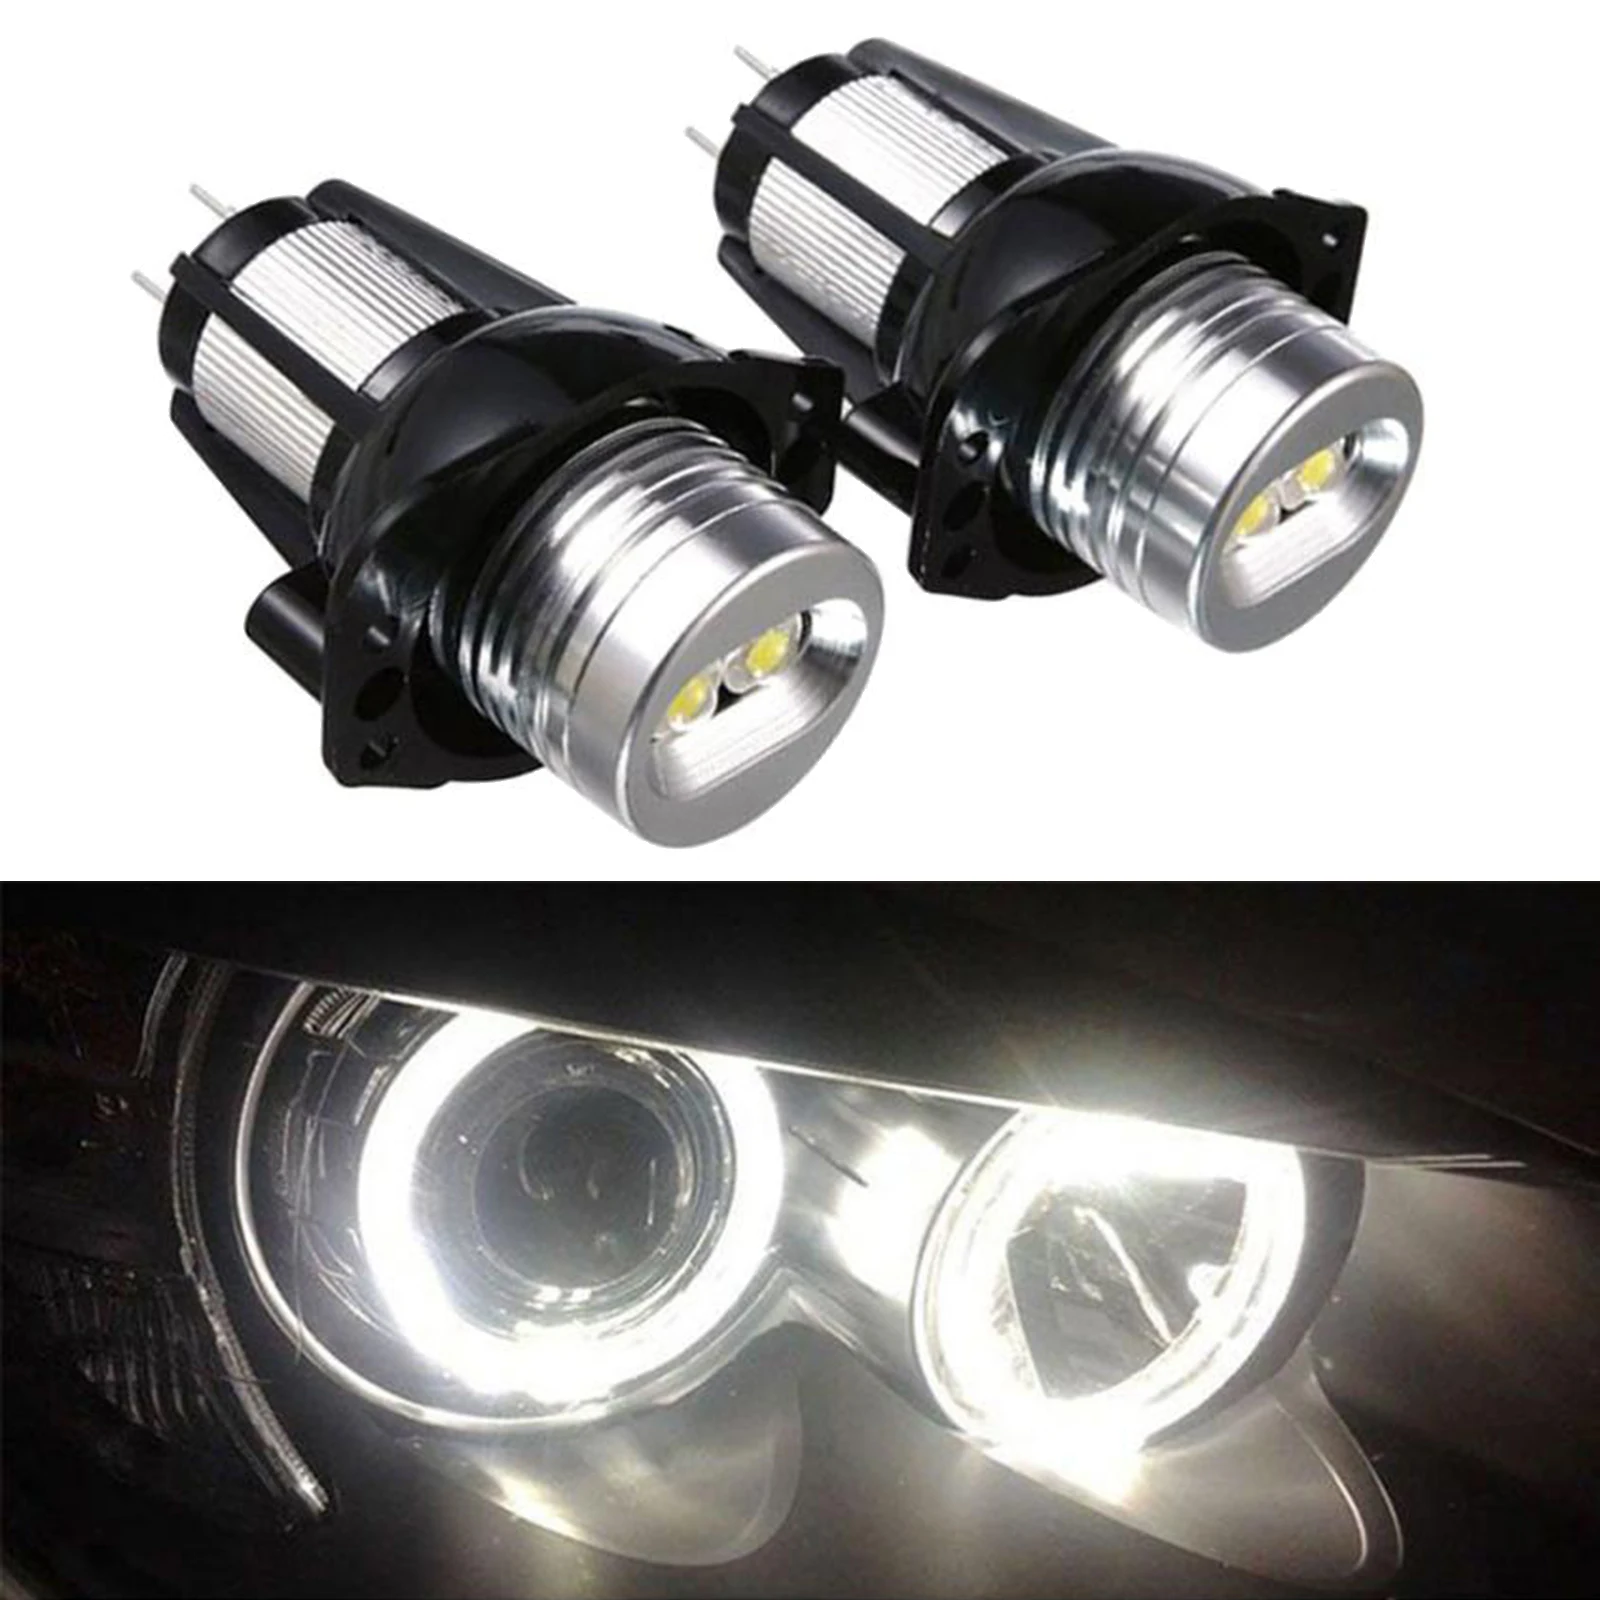 2Pcs High Power Angel Eyes Light Bulb, 12W 12V 6000K, Compatible with for BMW E90 E91 05-08 Replace Parts Accessories